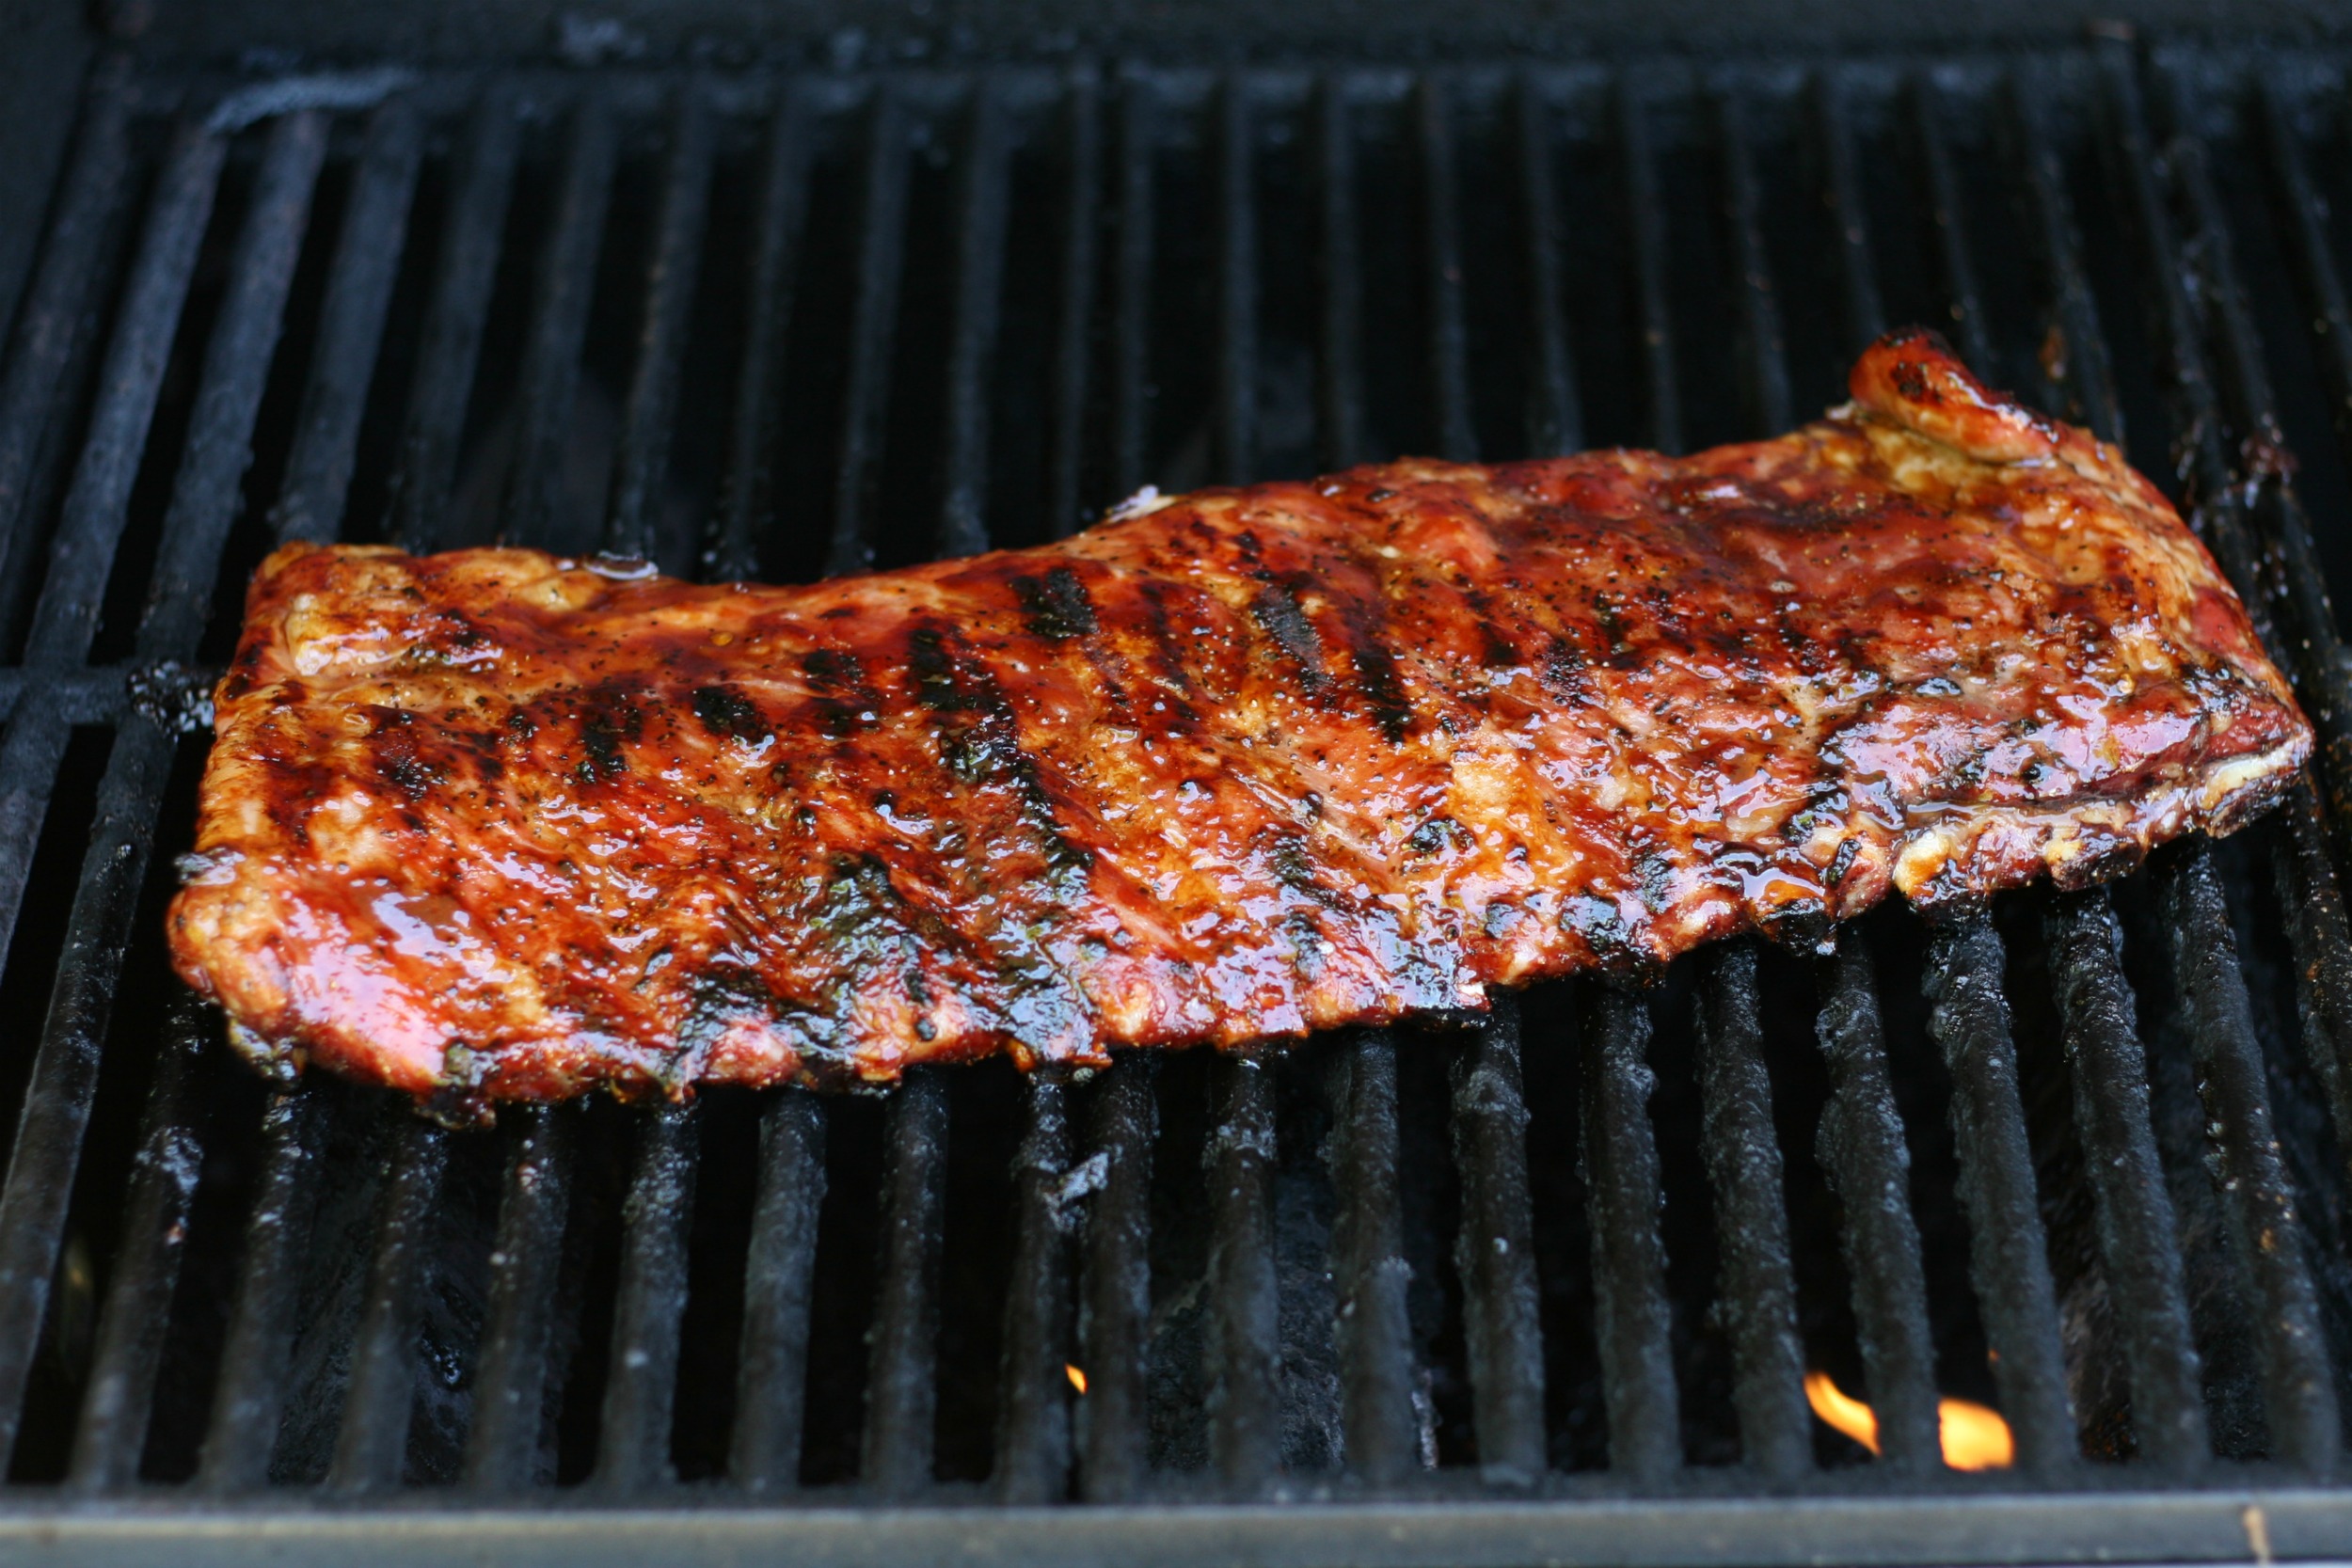 Ribs on grill grates on the gas grill with flames below.